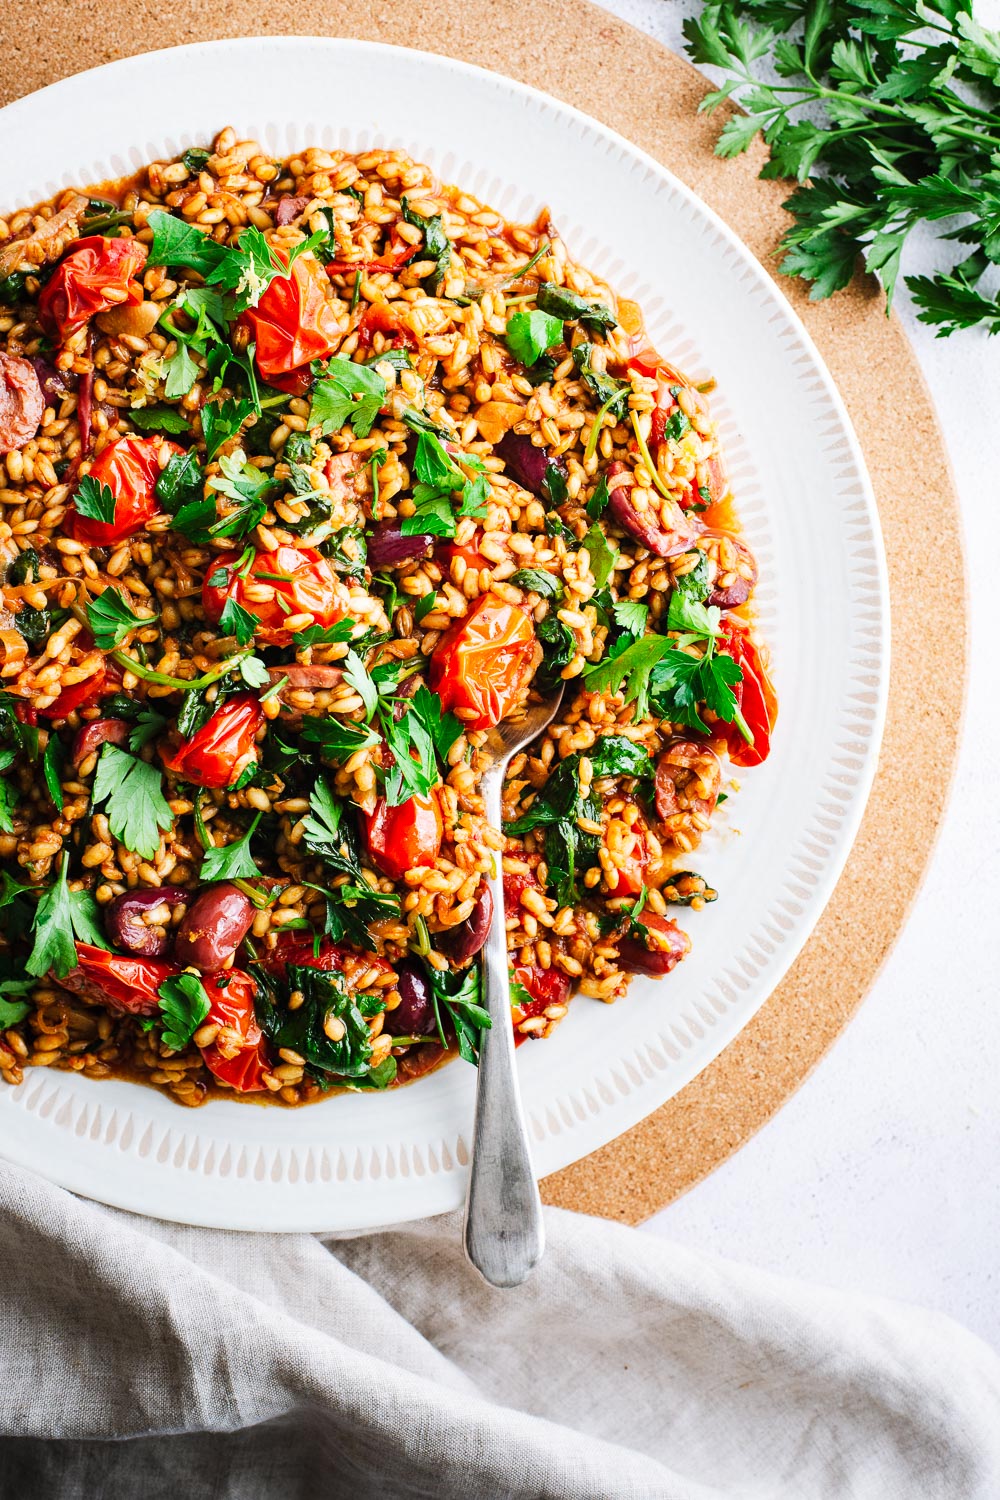 Healthy barley pilaf with rose harissa, tomatoes, olives and baby spinach.